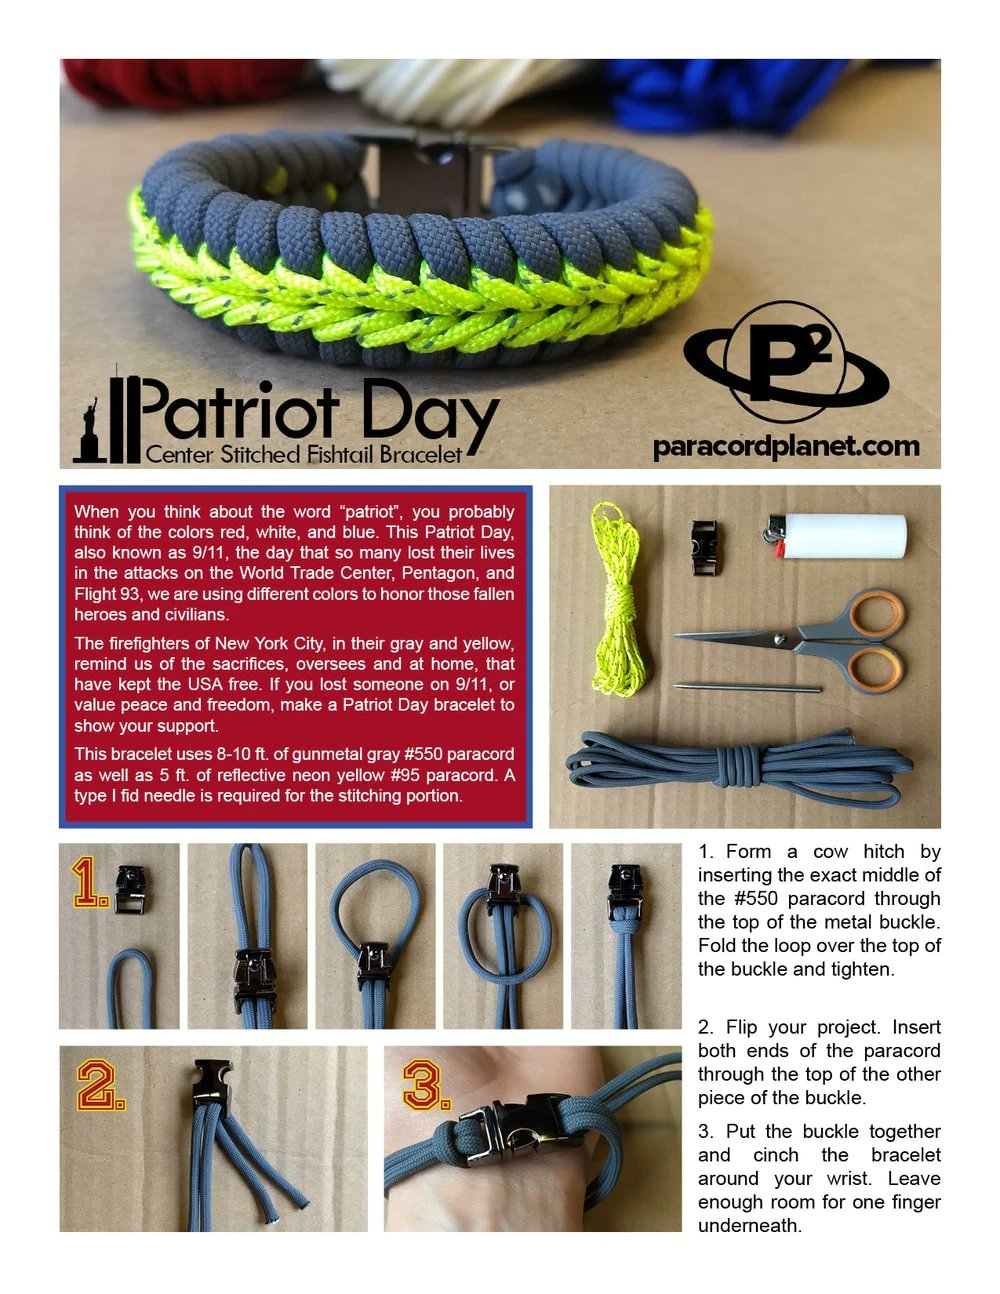 Paracord Planet on X: This tutorial shows how to make a center